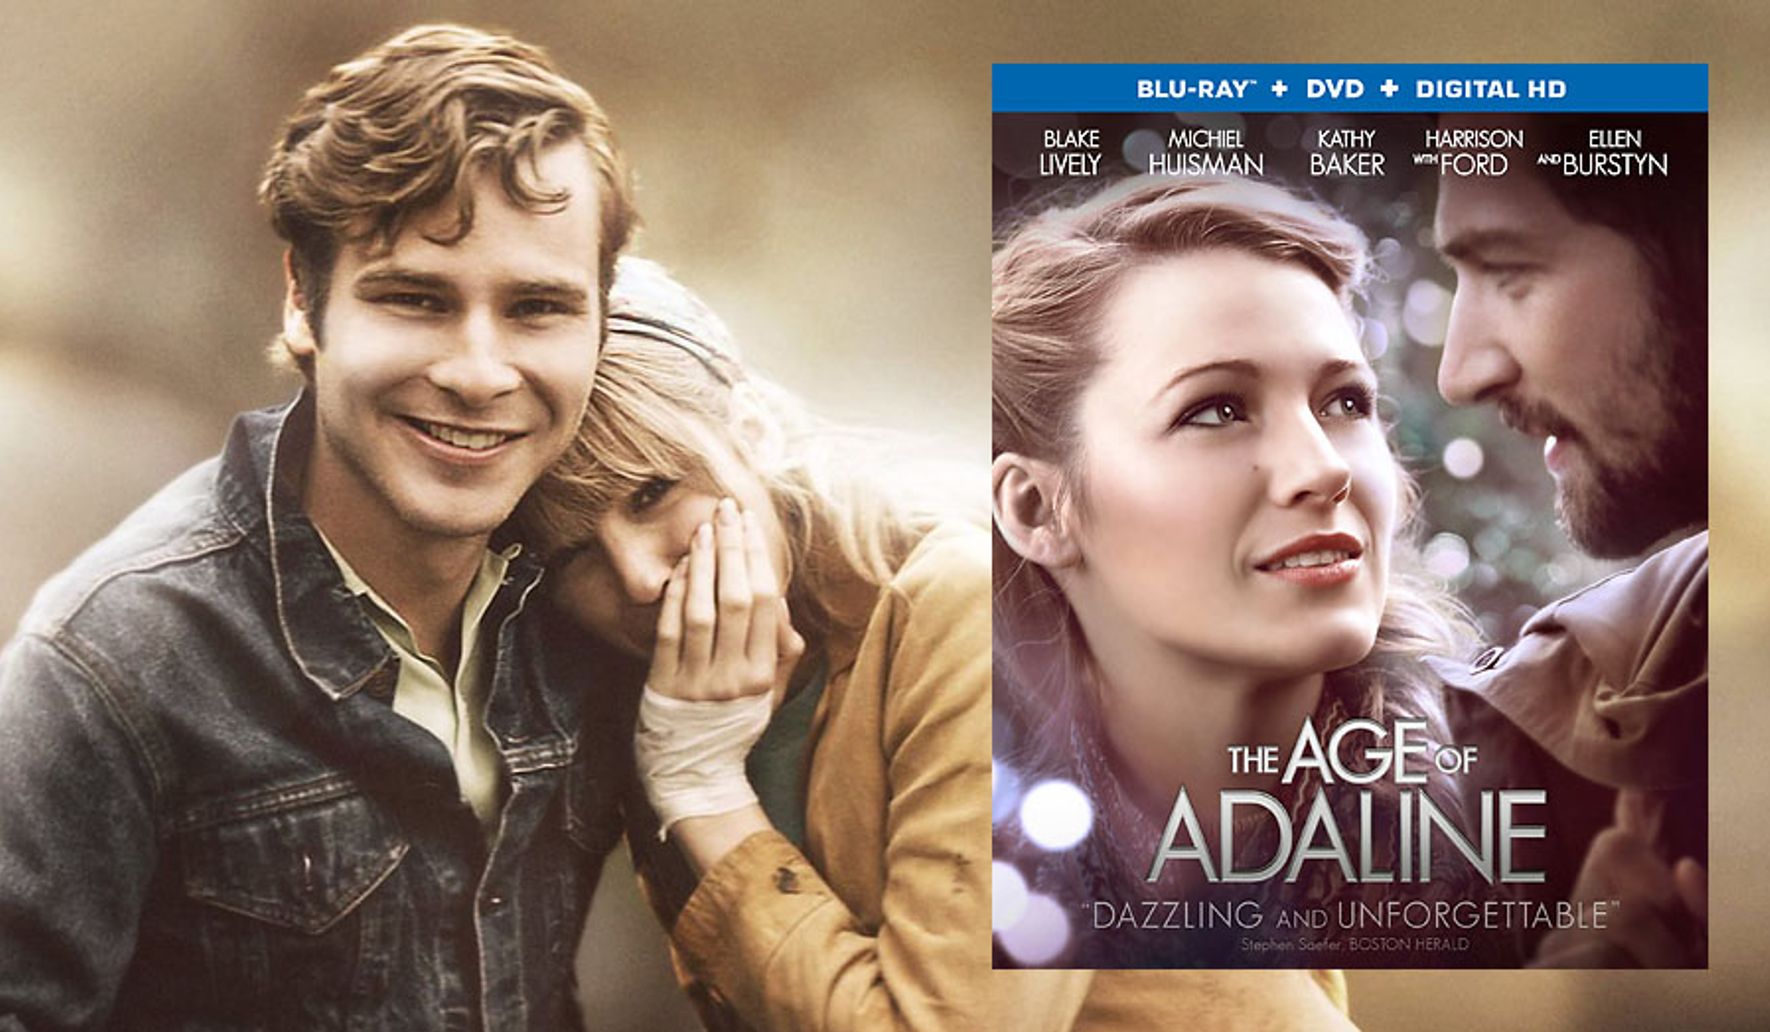 The age of adaline